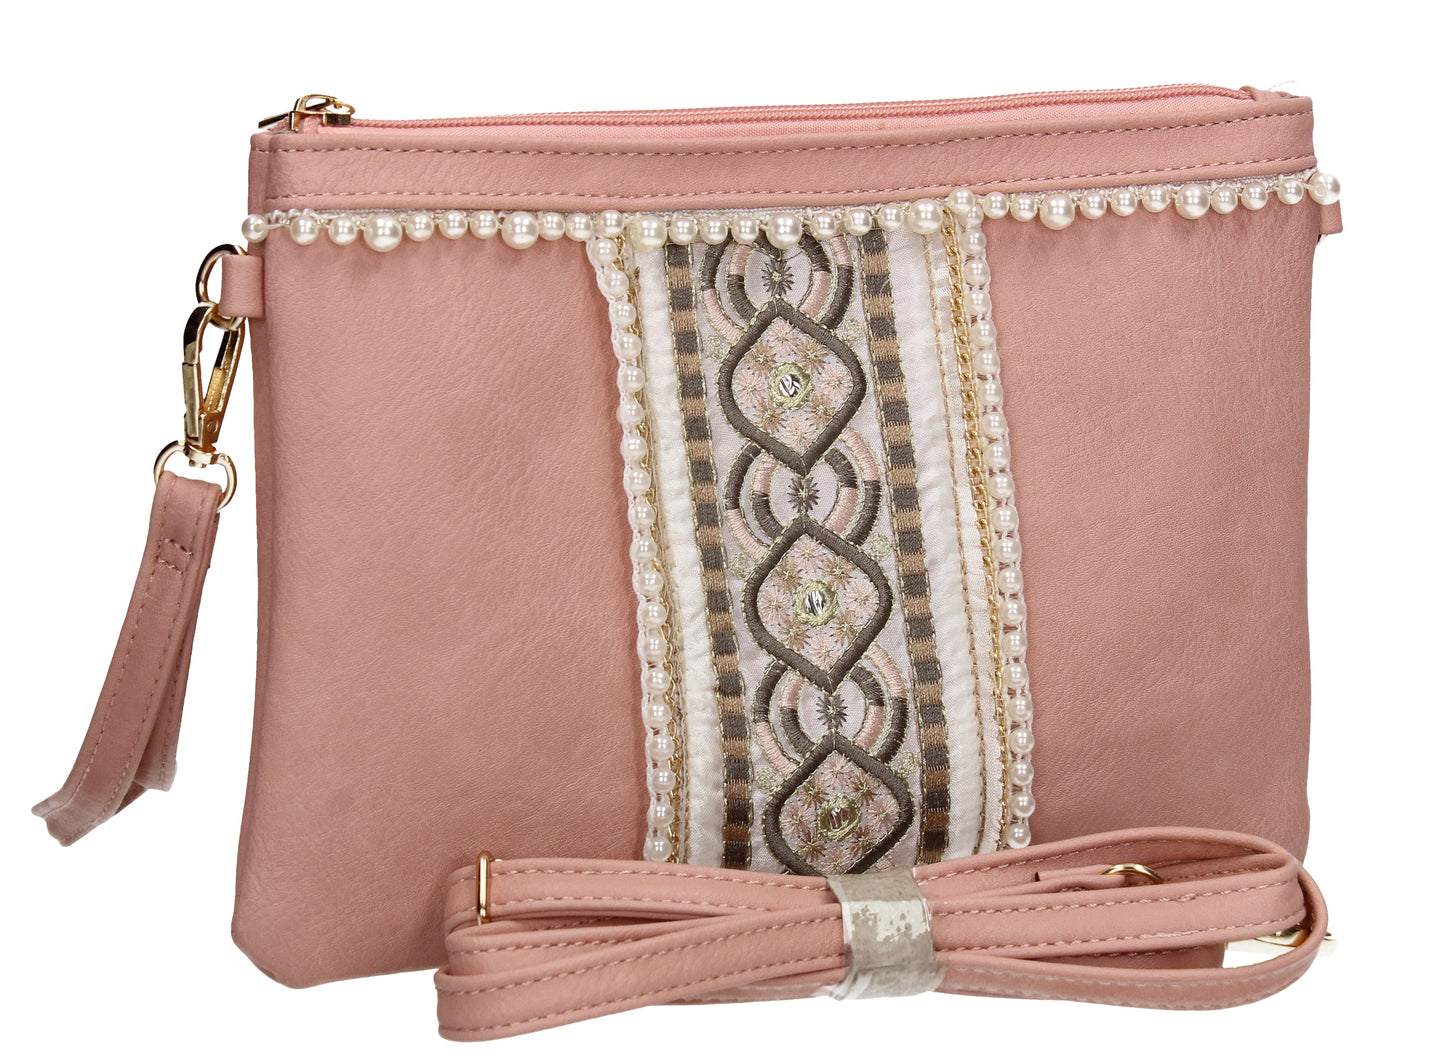 SWANKYSWANS Delilah Clutch Bag Pale Pink Cute Cheap Clutch Bag For Weddings School and Work